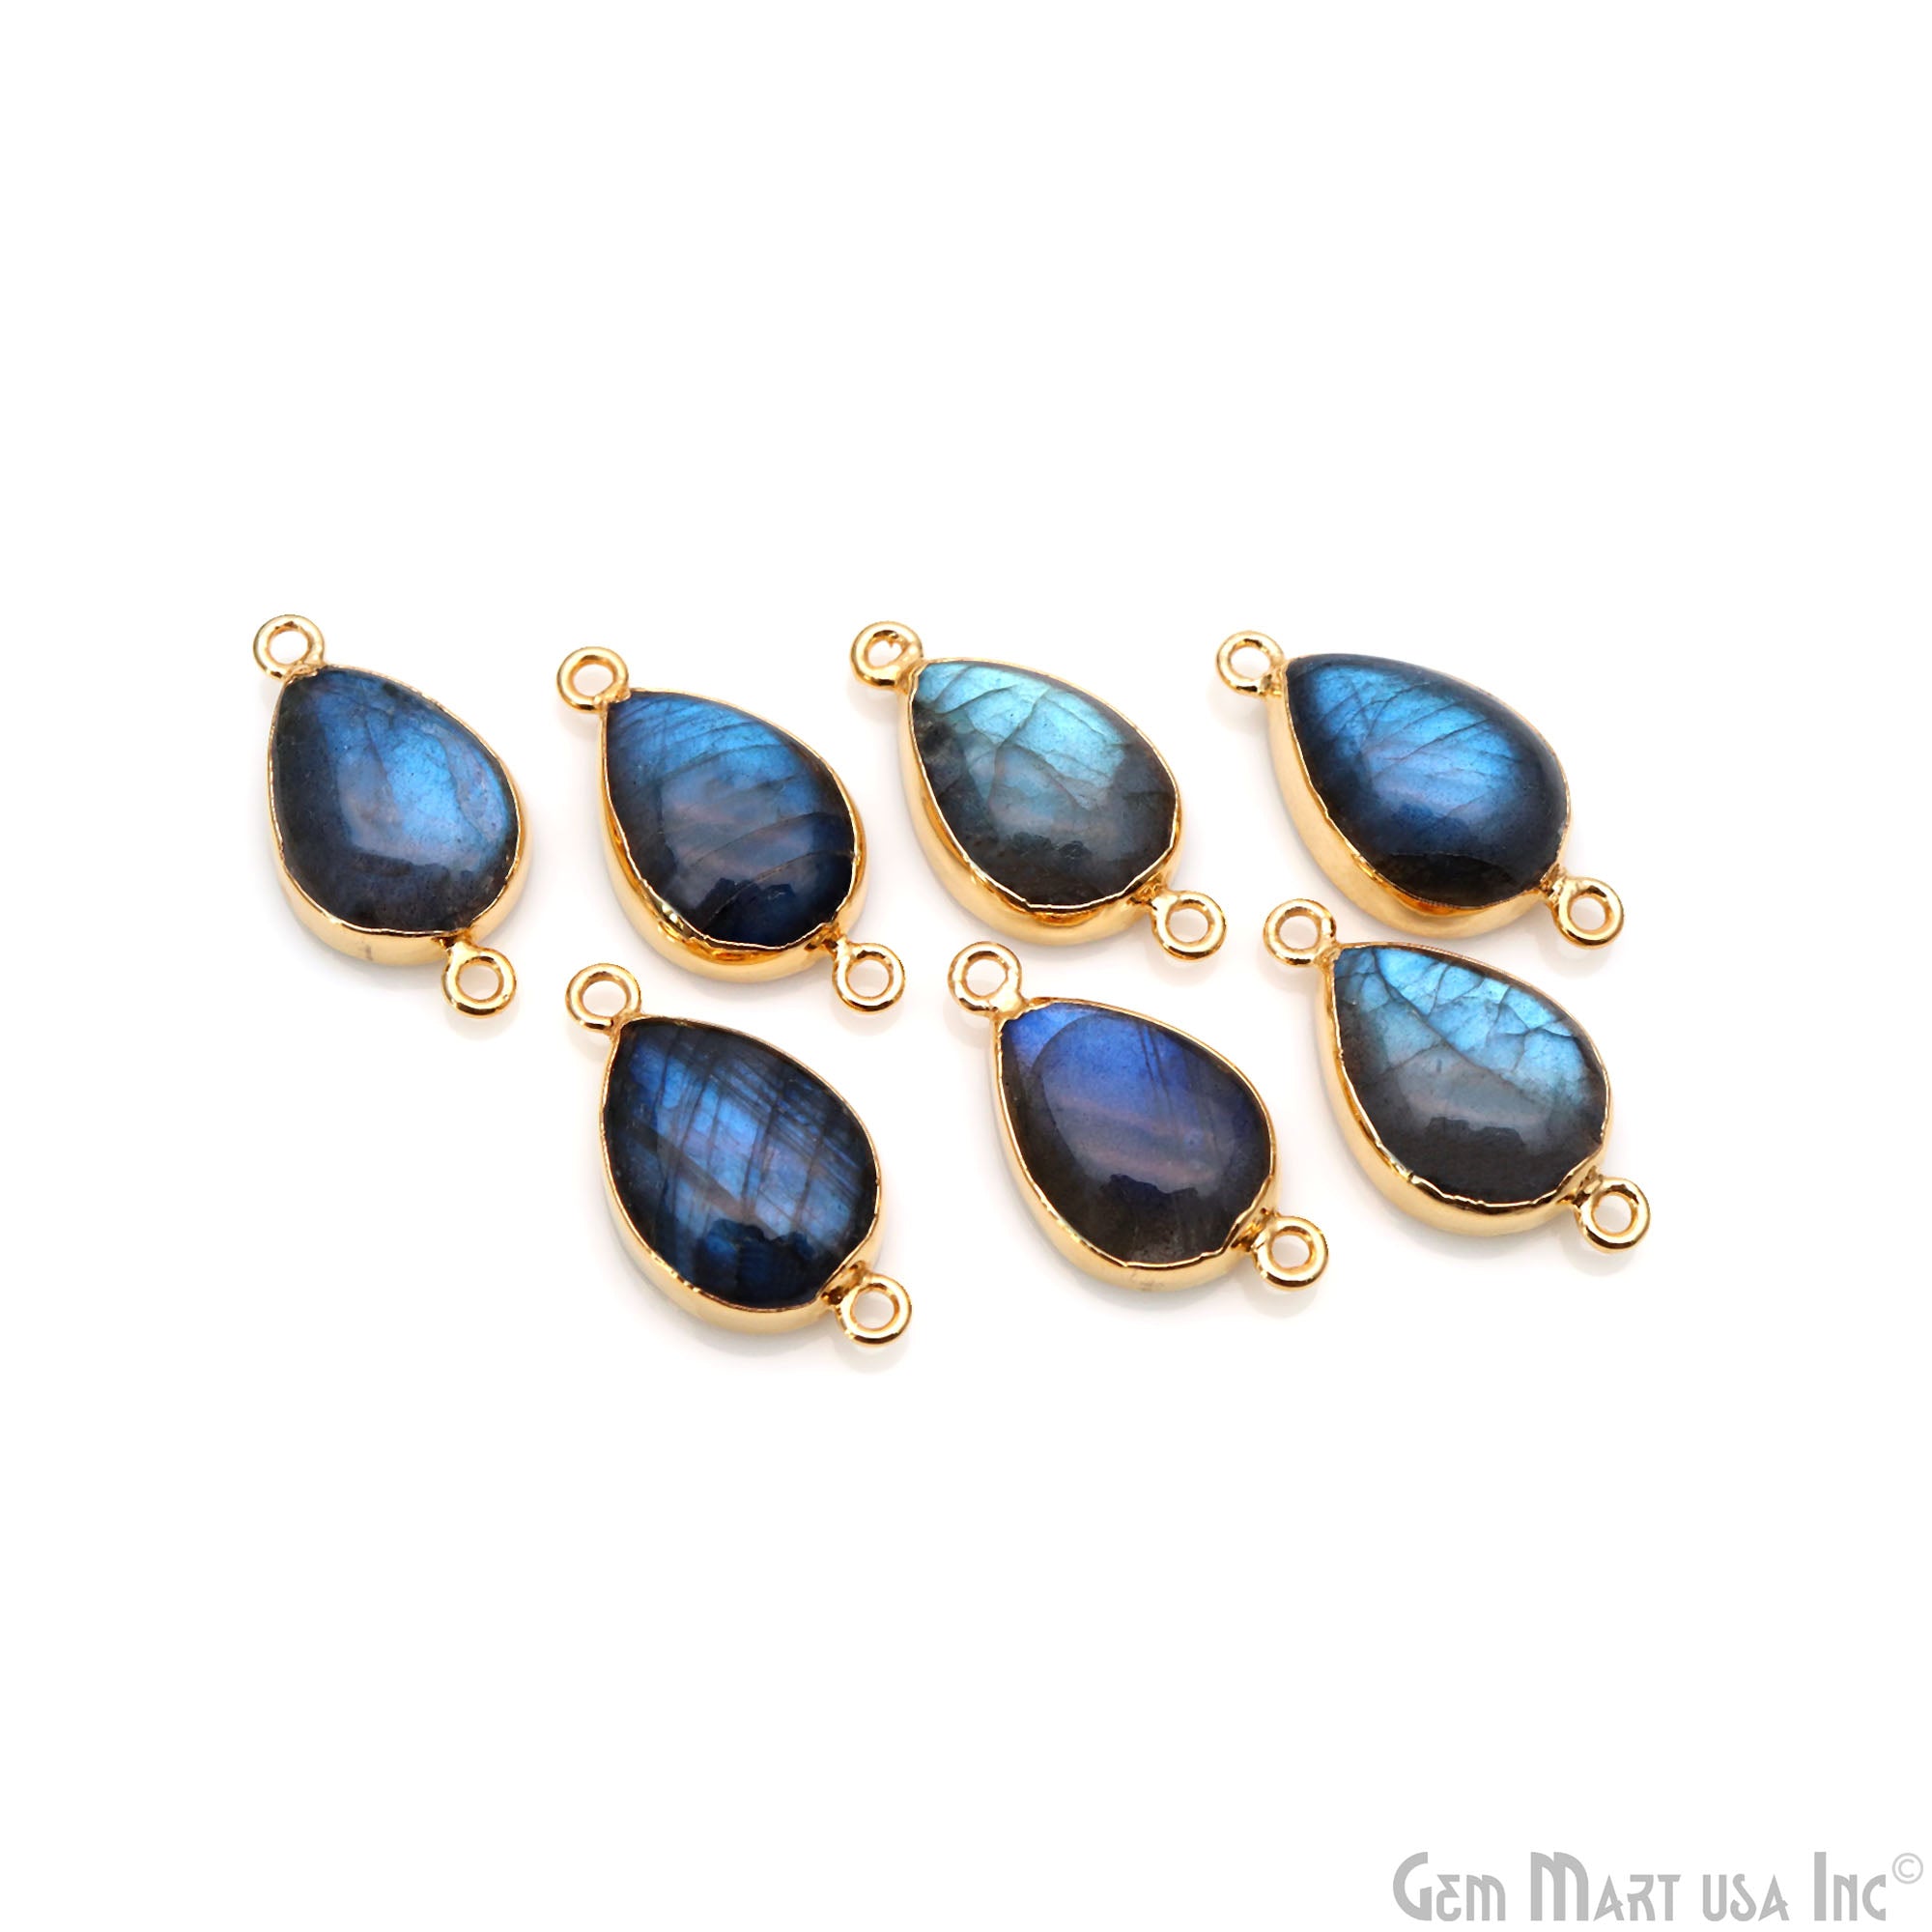 Flashy Labradorite 25x13mm Cabochon Pears Double Bail Gold Electroplated Gemstone Connector